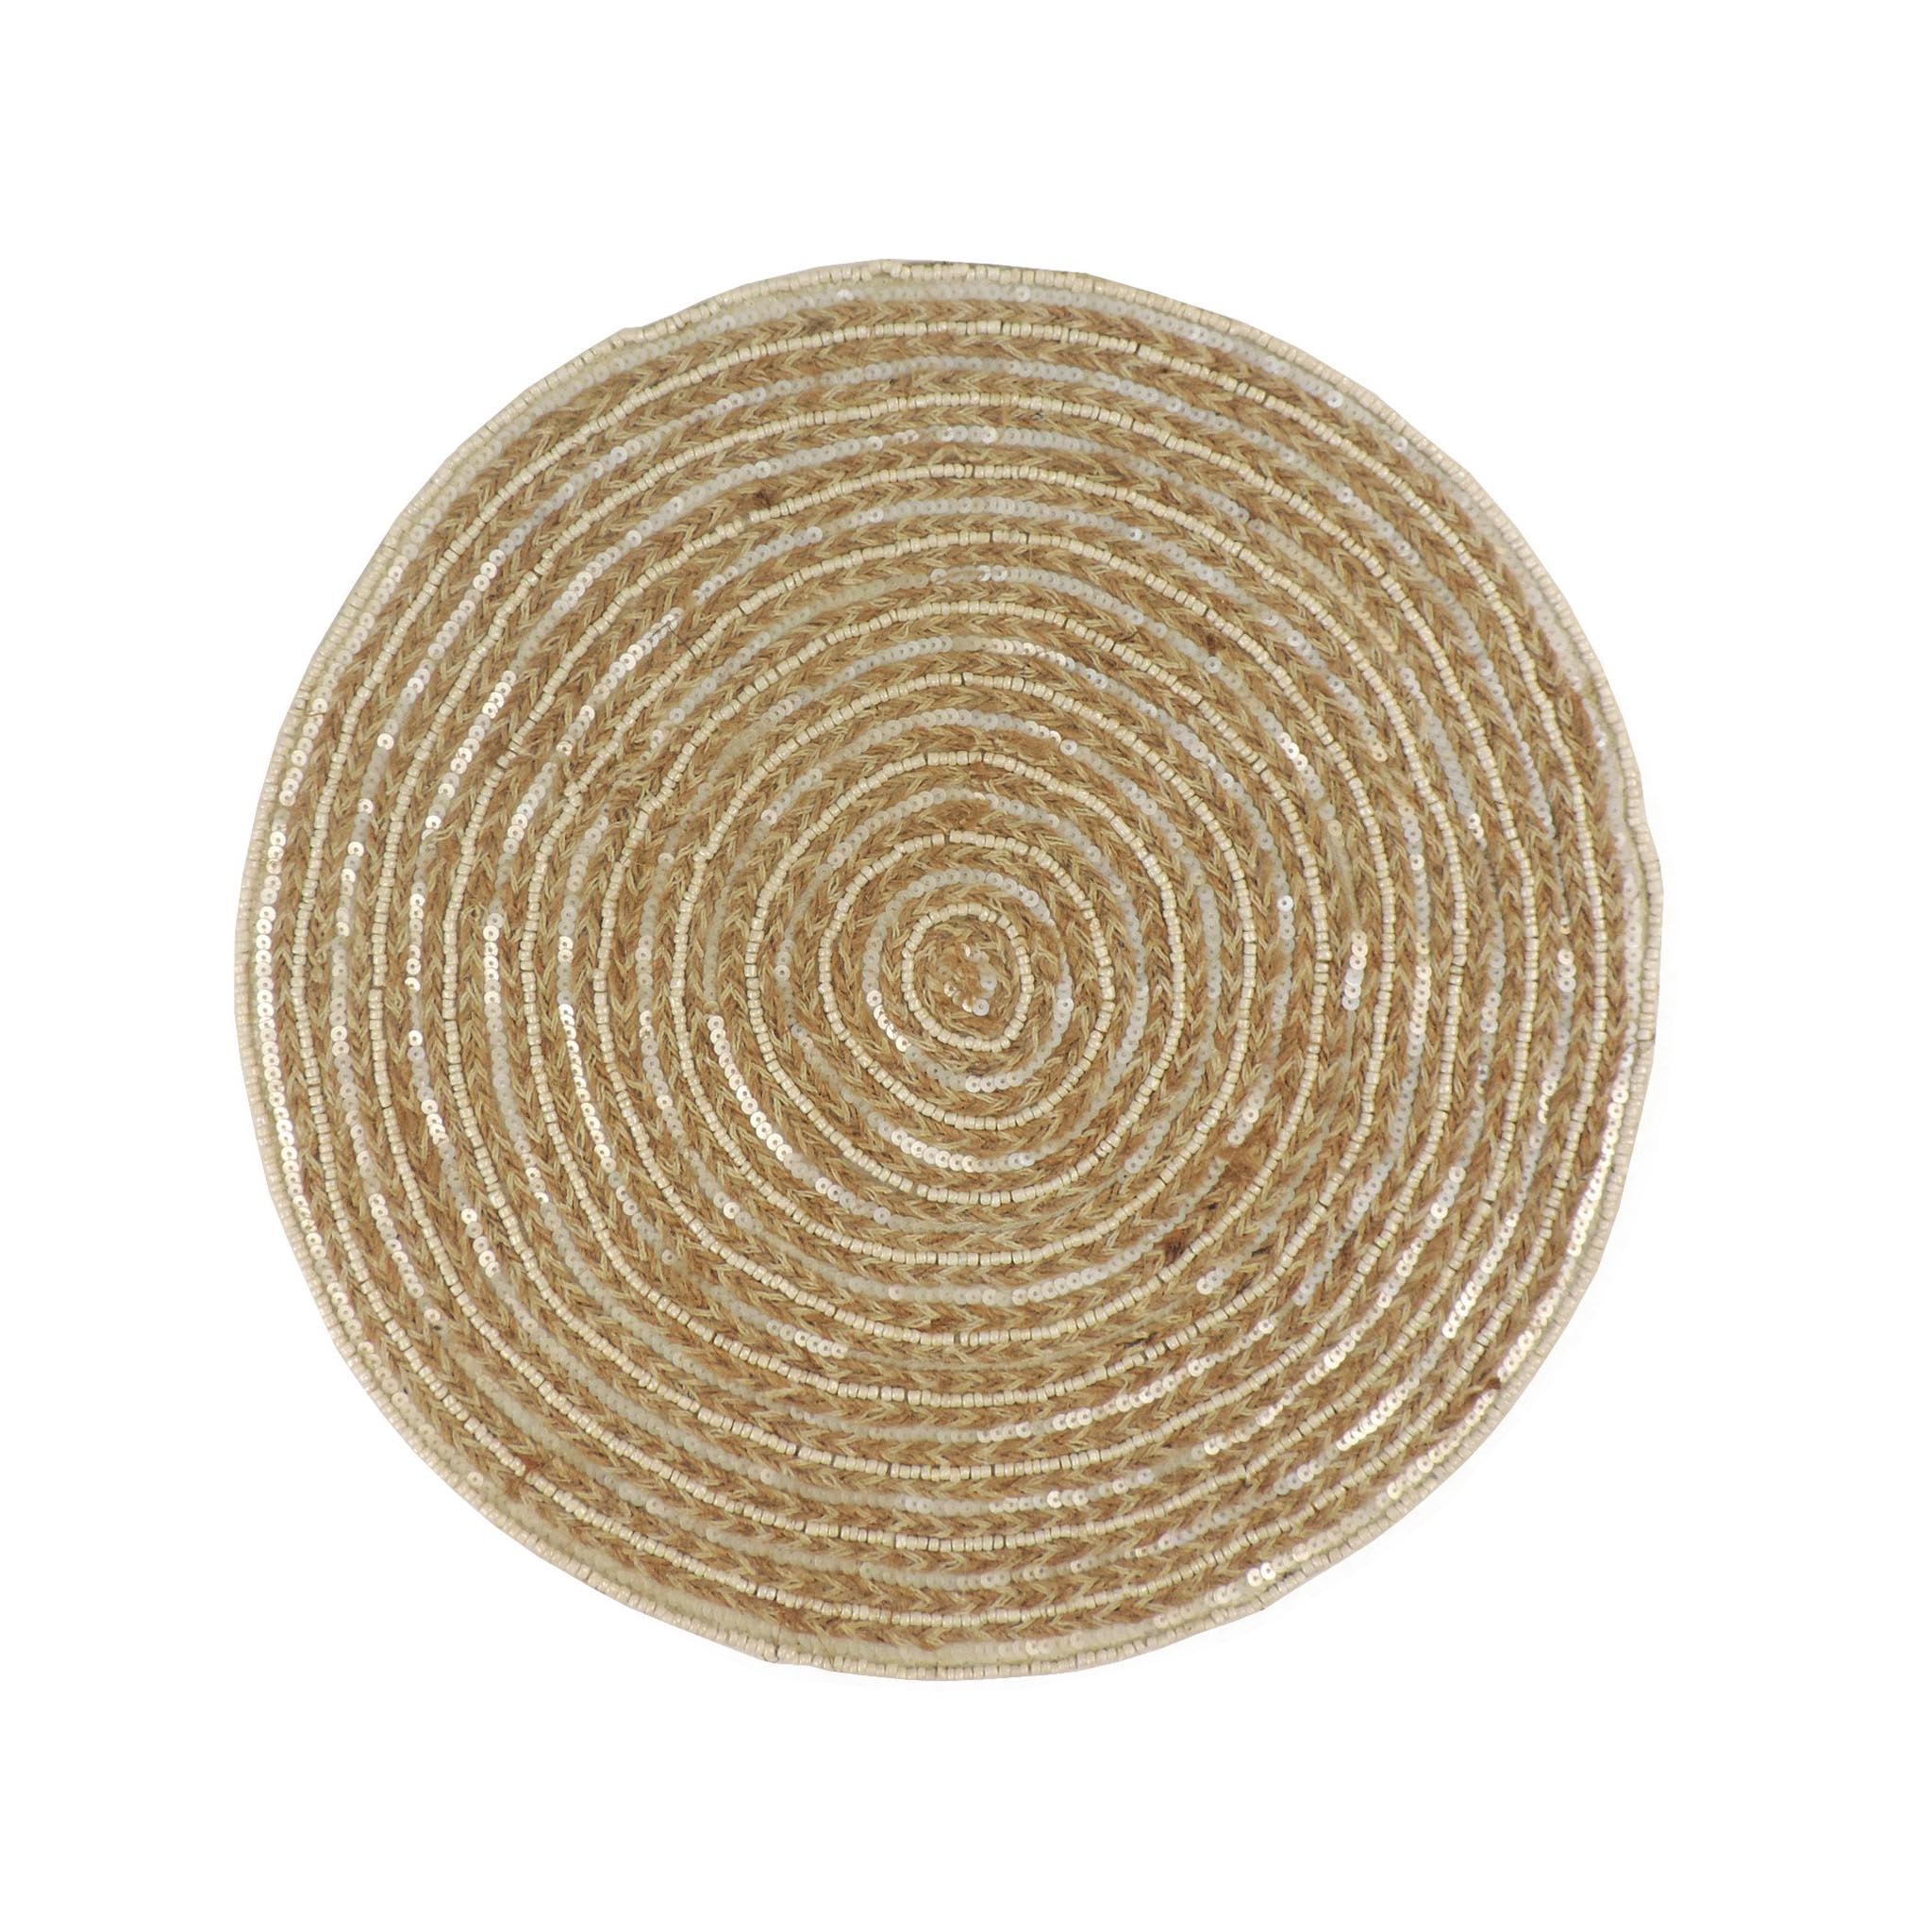 Jute Embroidered Placemat<br>Color: Beige<br>Size: 15" Round<br>Set of 2/4